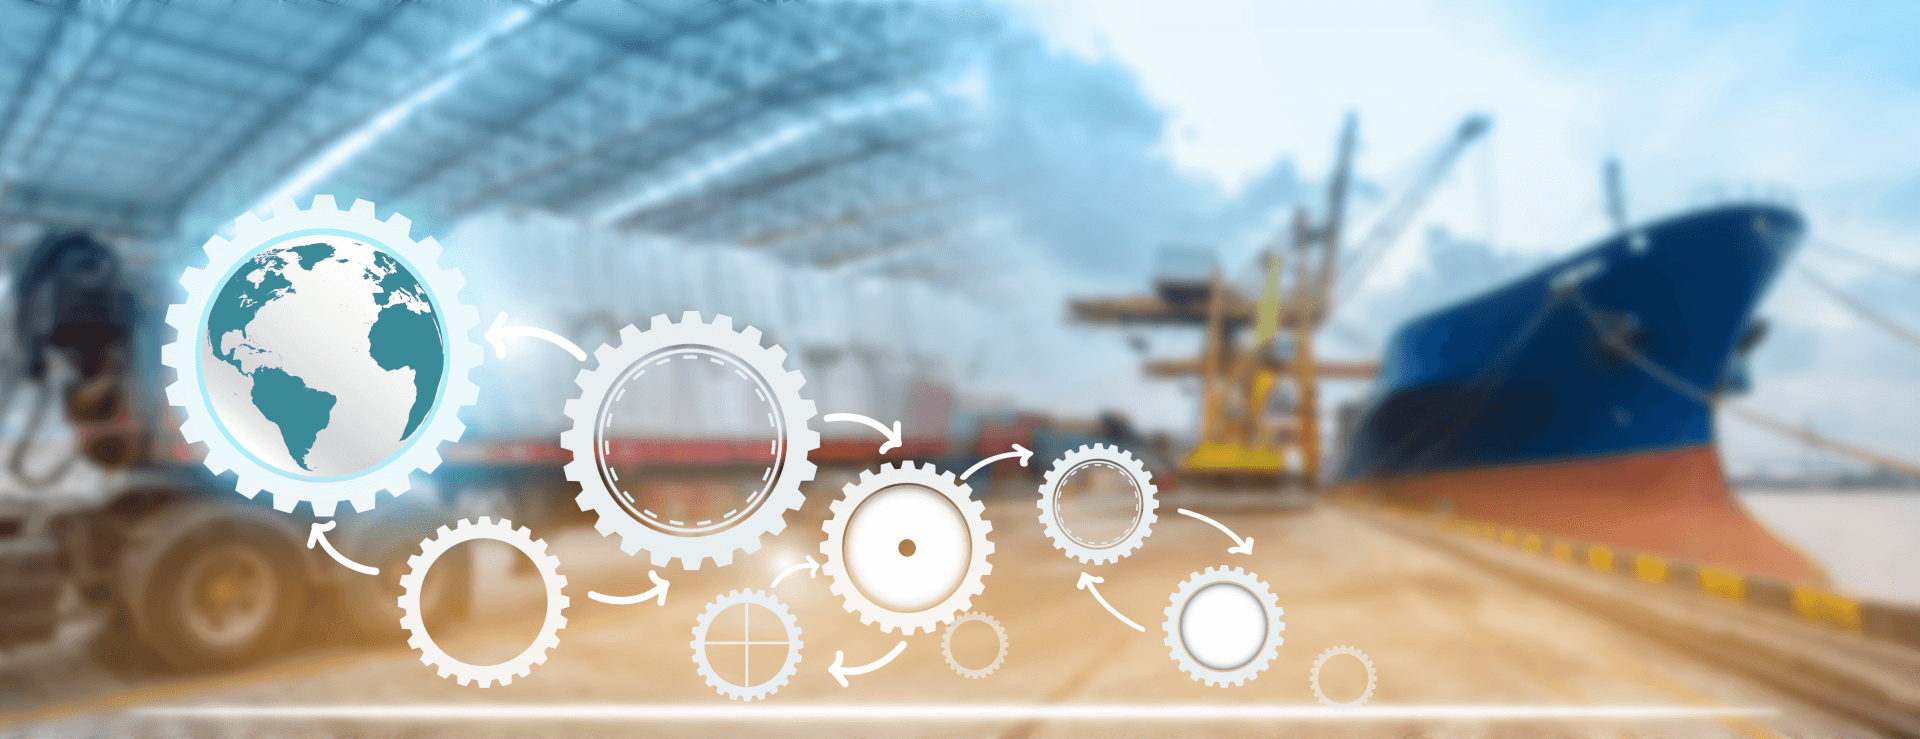 Supply Chain Sustainability with Circularity